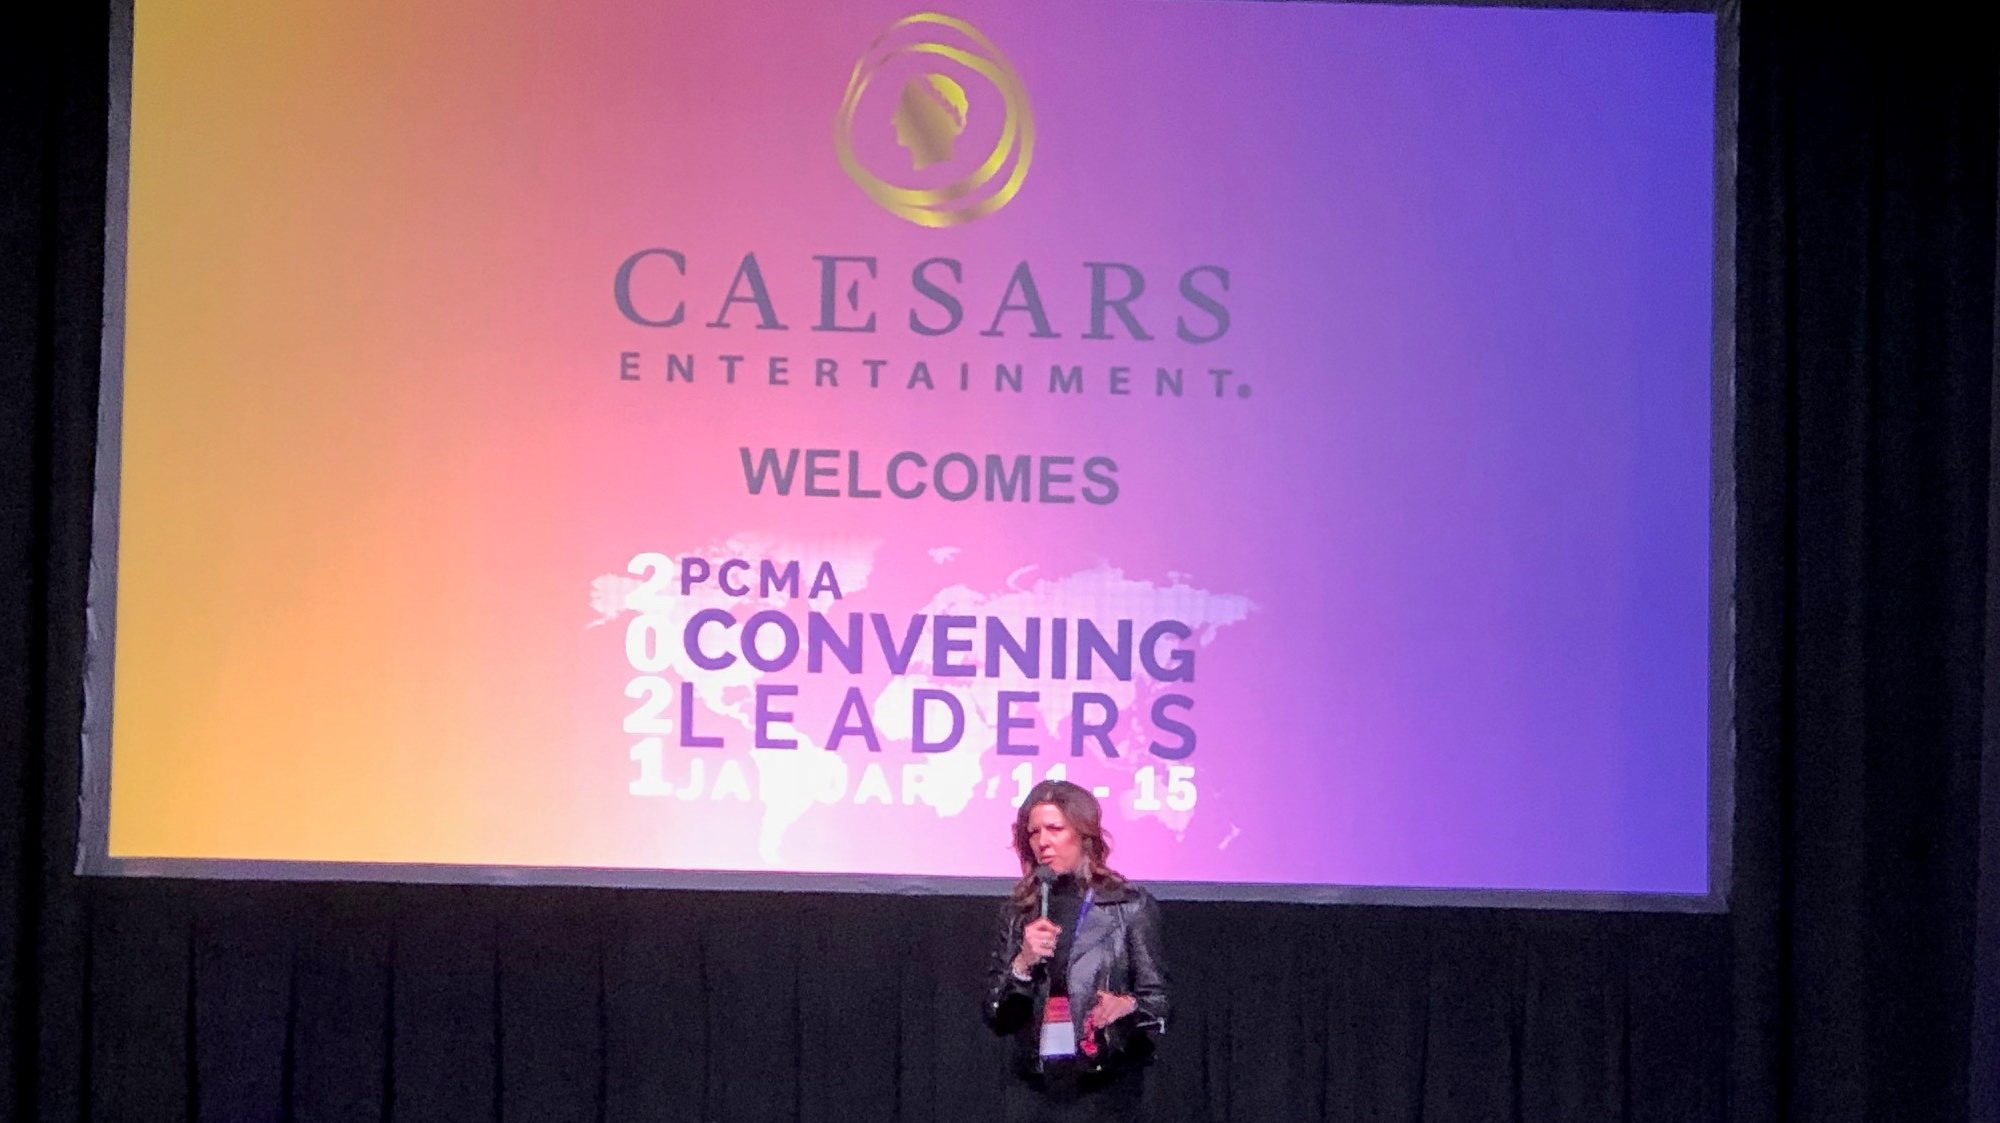 PCMA Convening Leaders Call for Innovation Everywhere